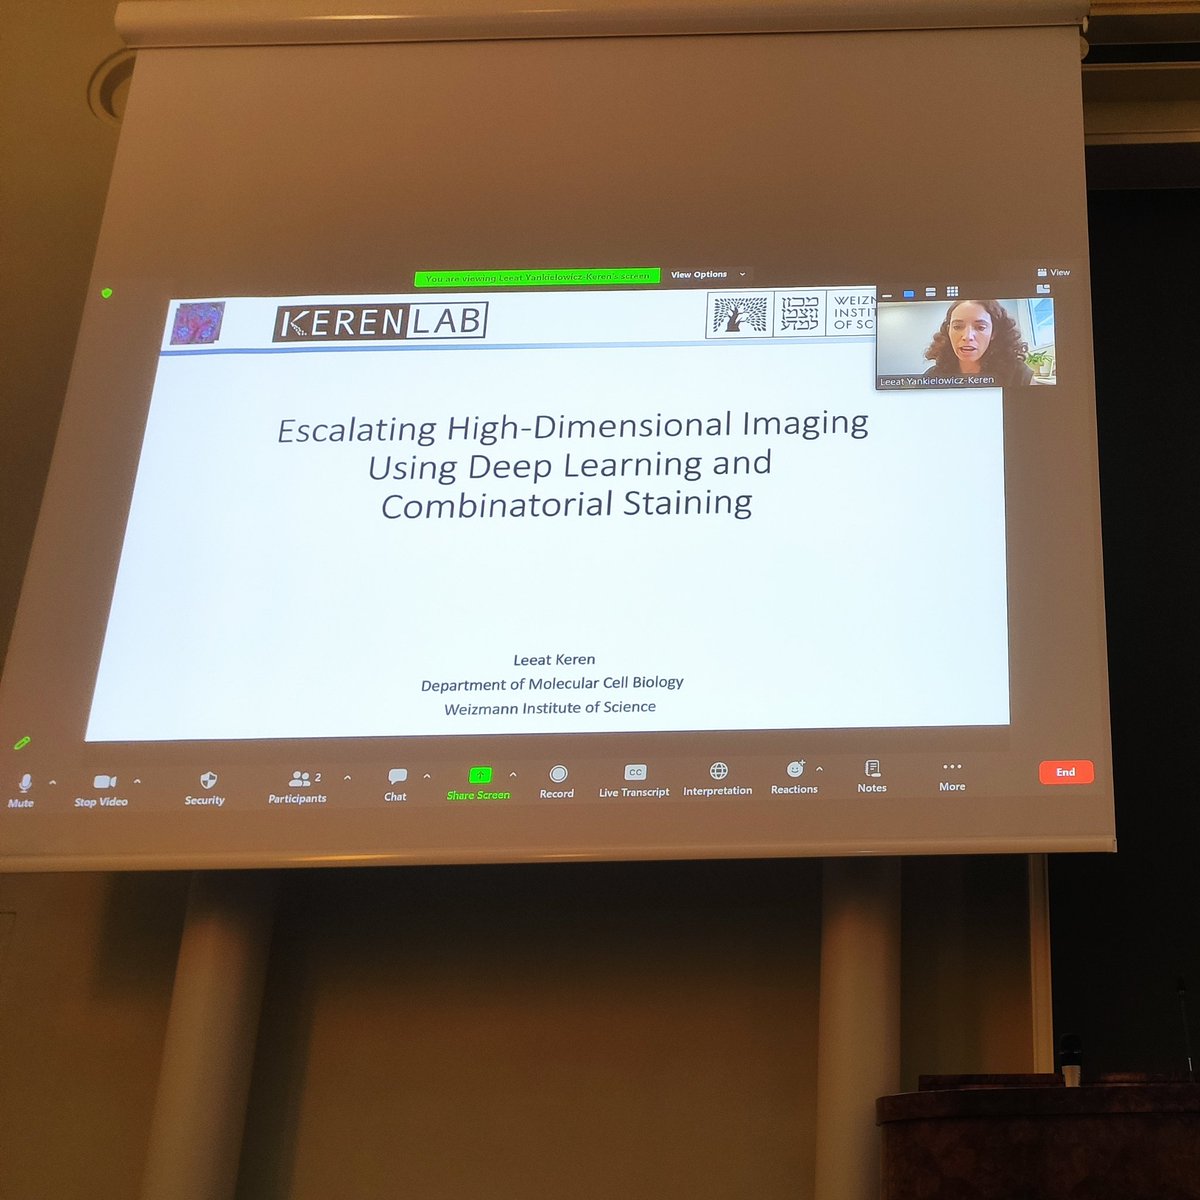 Exciting morning session at #CytoData2023 starting with @leeat_keren 's amazing talk on combinatorial multiplexing (thanks for joining remotely despite the awful circumstances!) We sticked to tissue images with @tanevski and explored cell phenotyping with @jccaicedo